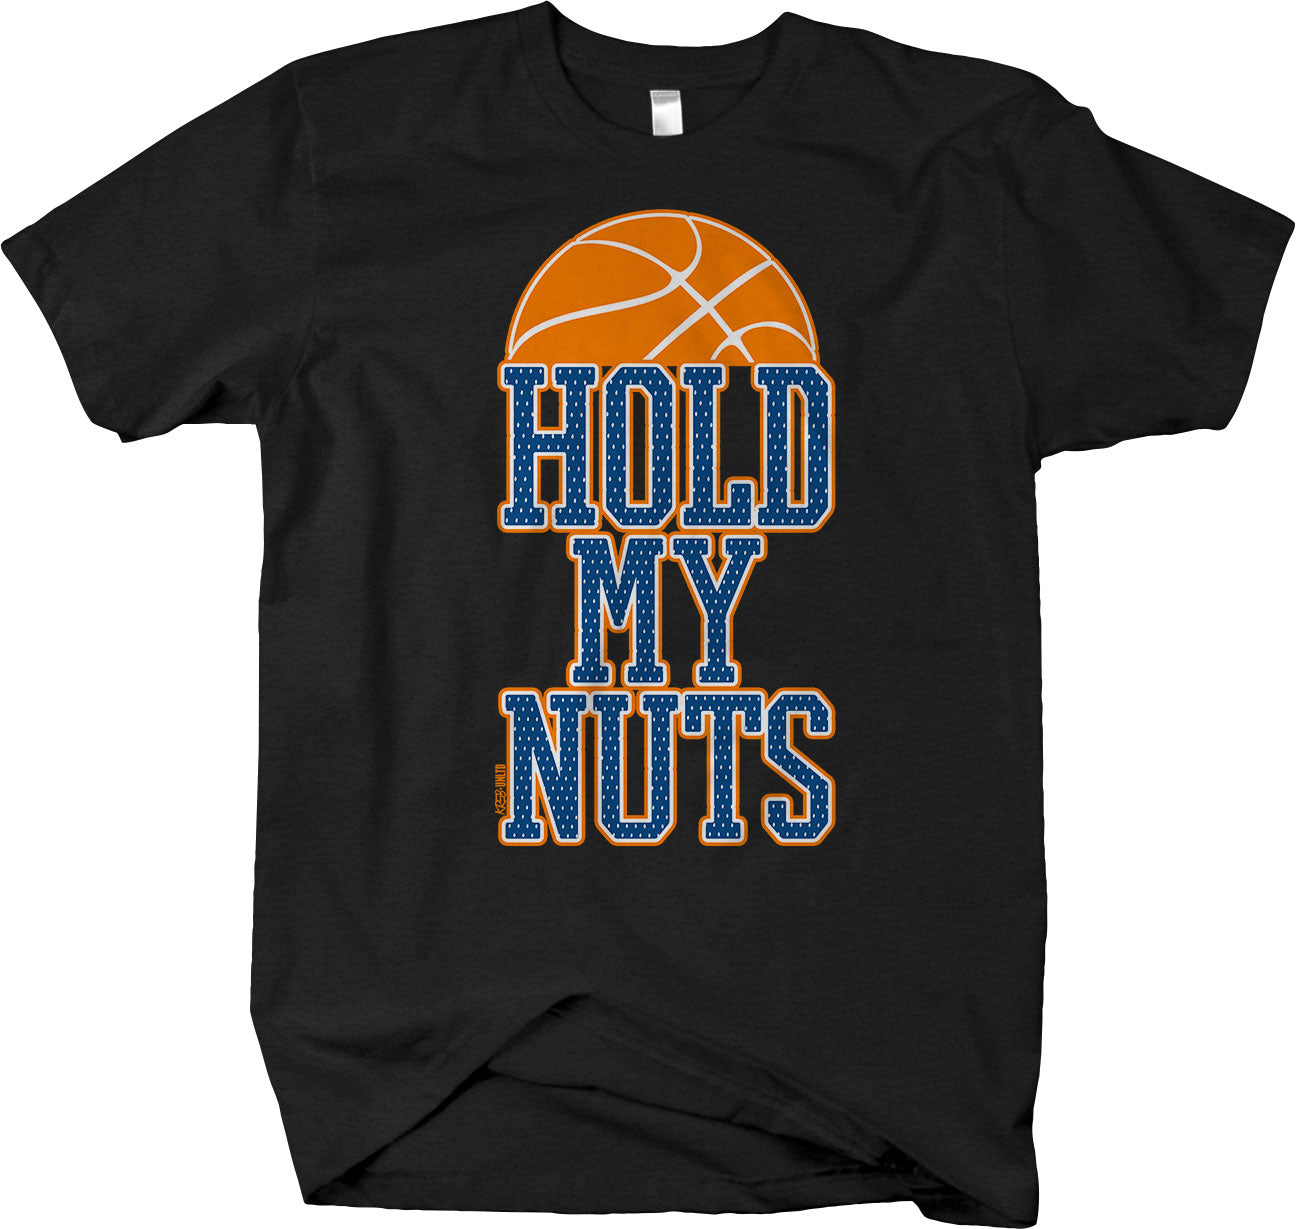 Hold My Nuts T-shirt - Inspired by The movie Uncle Drew - LARGER SIZES